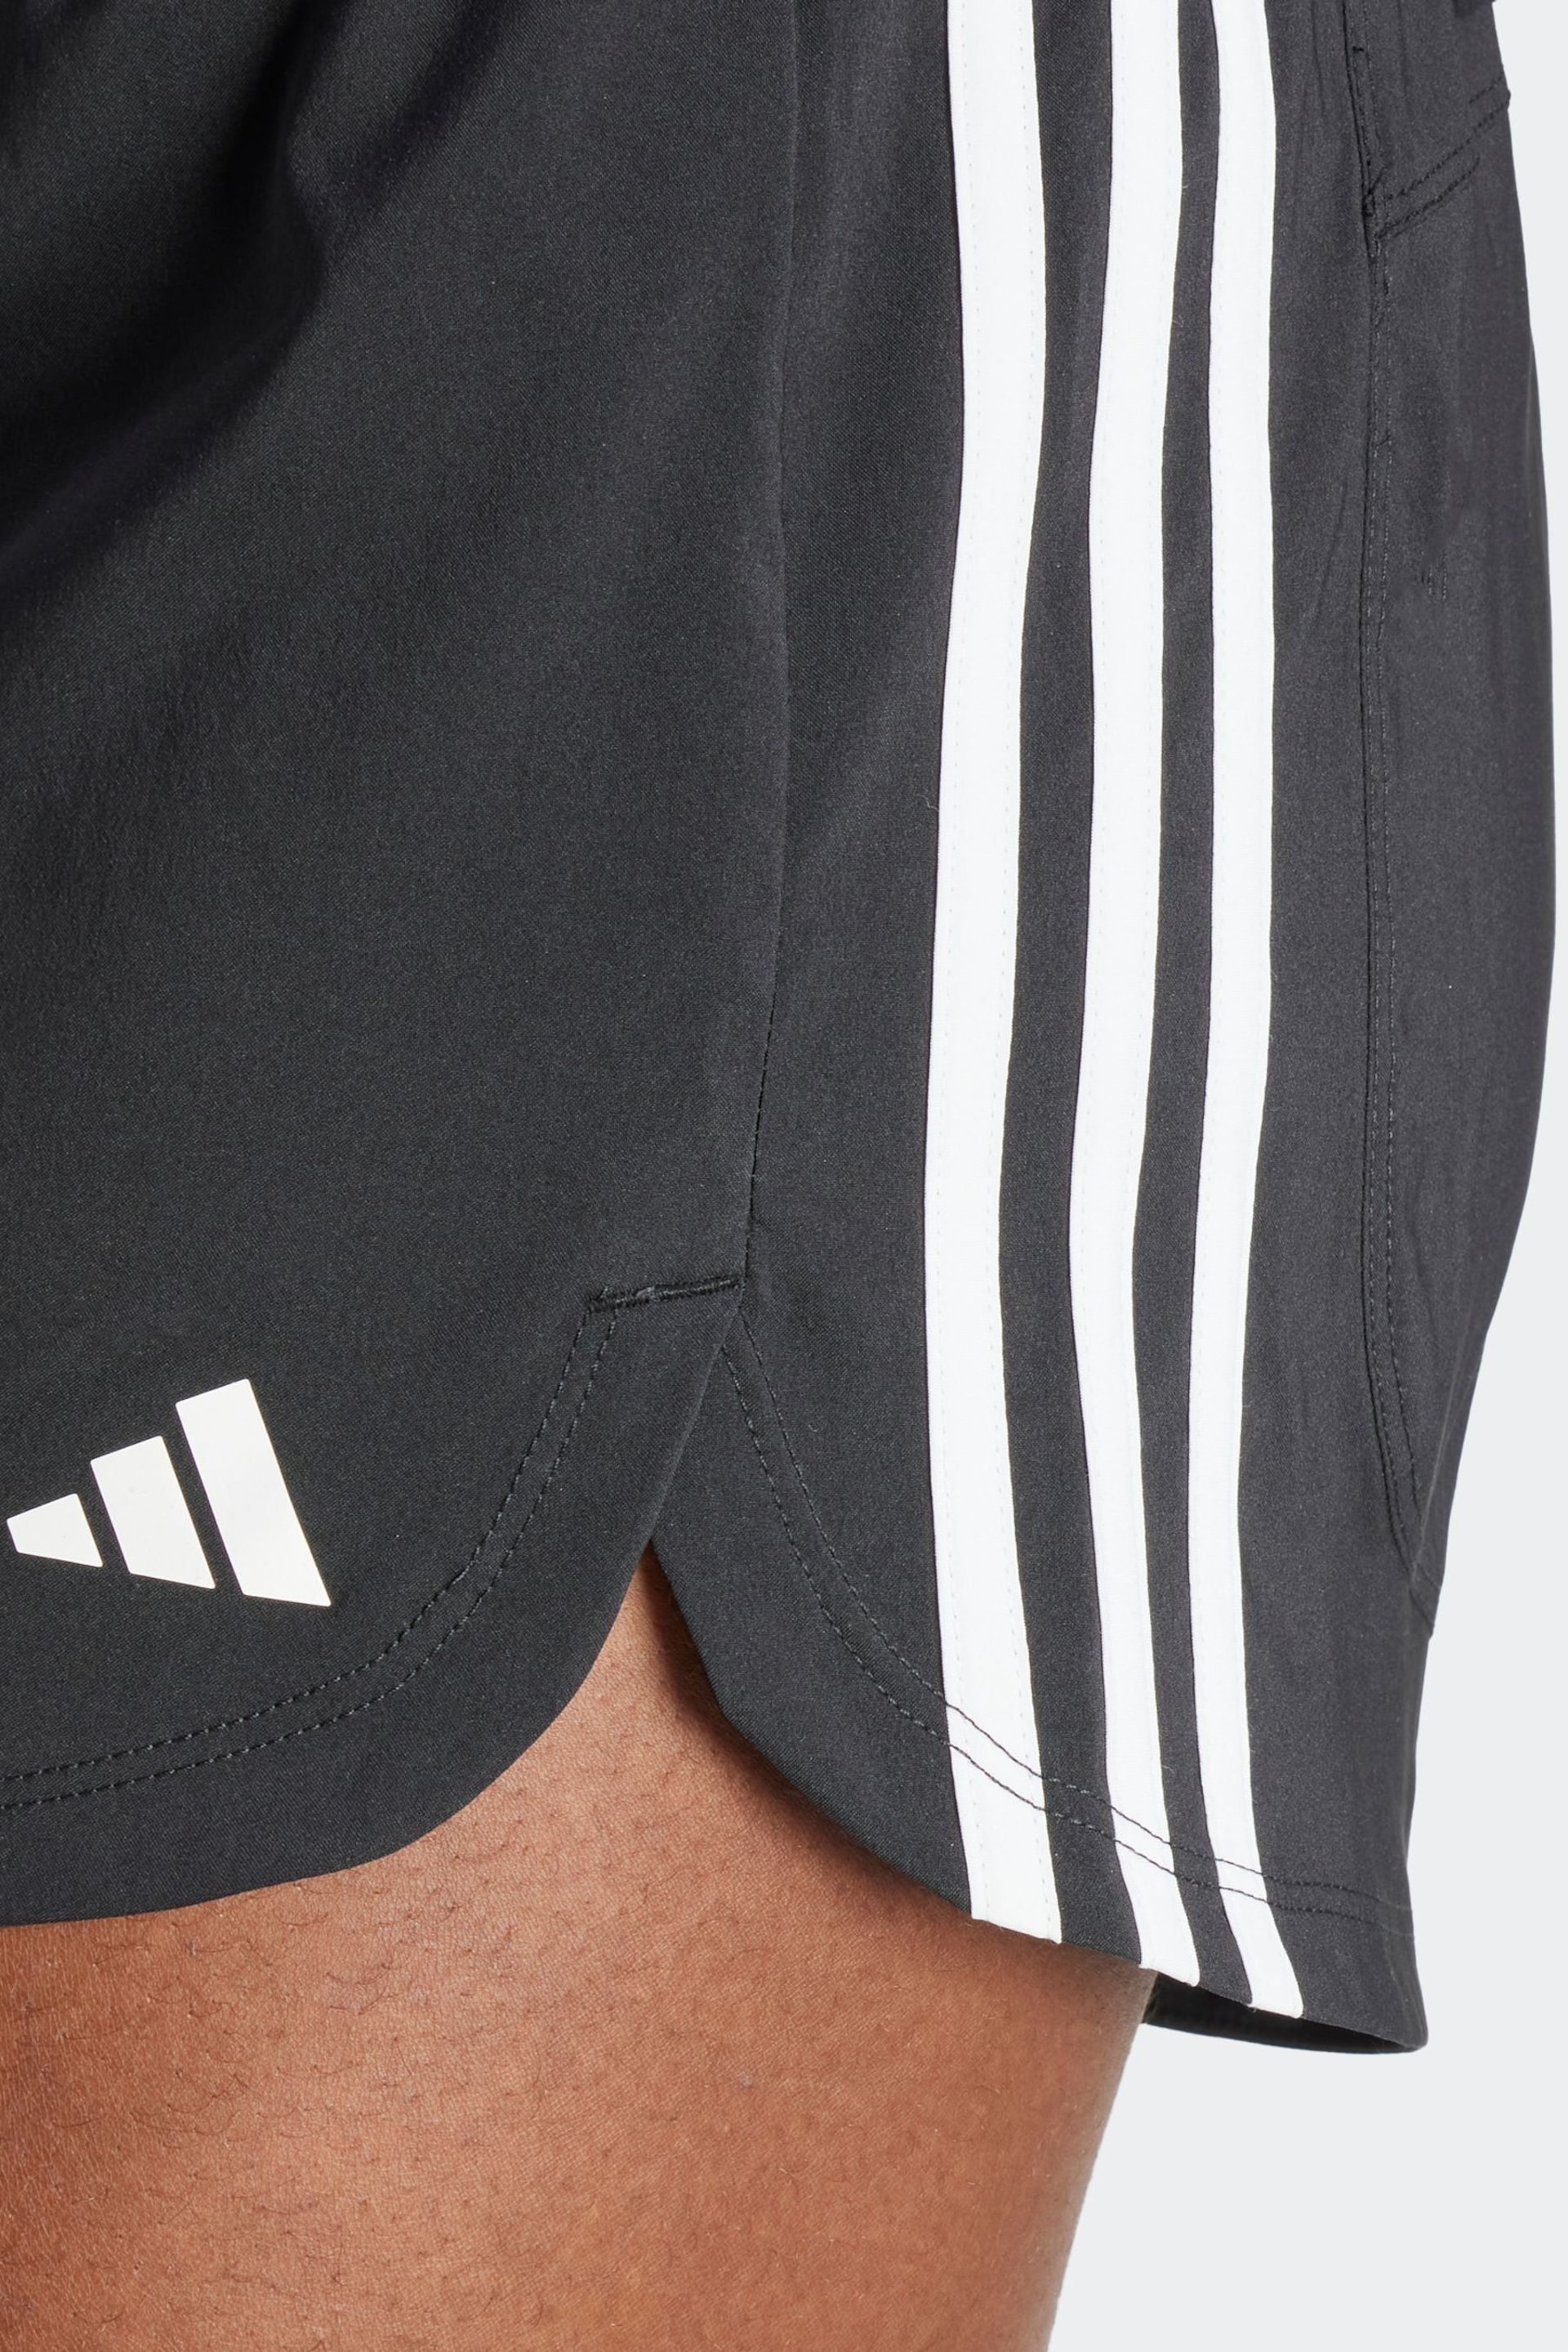 adidas Black Pacer Woven Shorts - Image 5 of 6